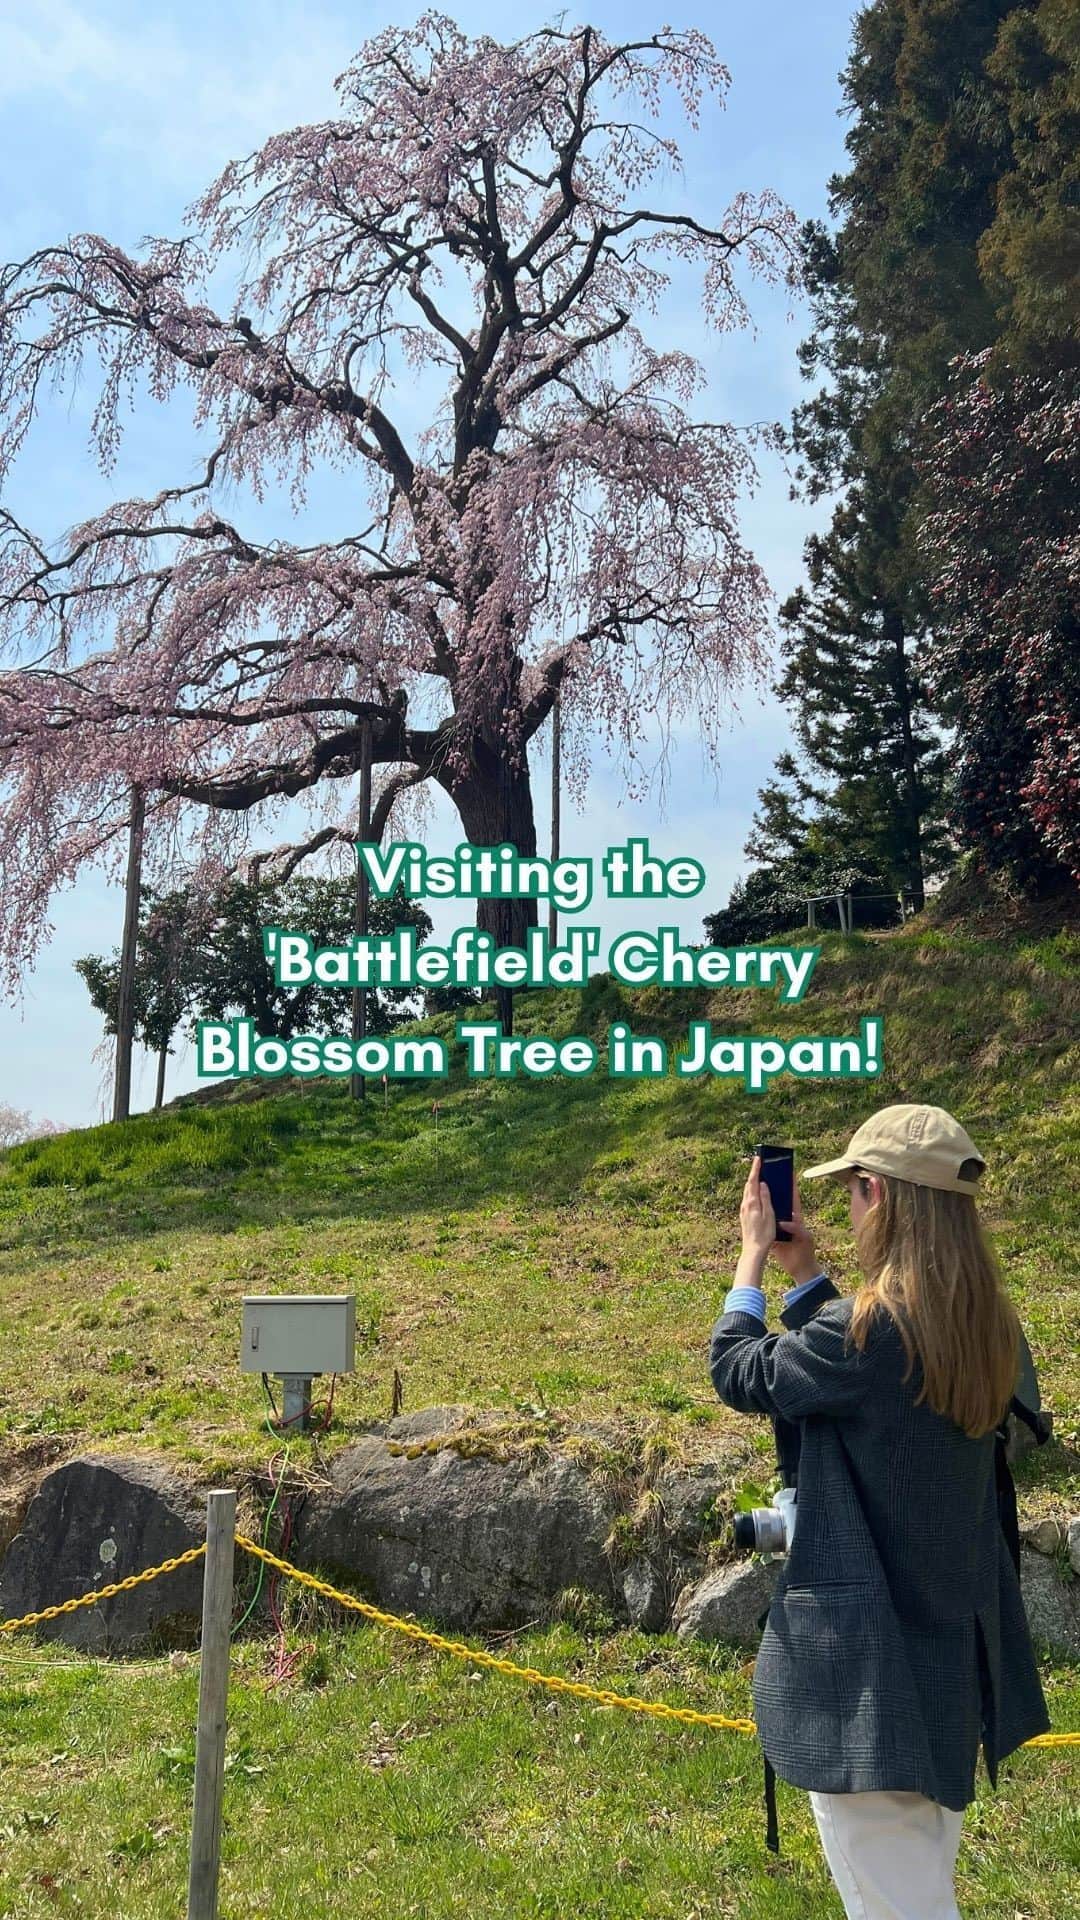 Rediscover Fukushimaのインスタグラム：「A battlefield? 🤔 Husband and wife? 👀 Grandchildren? 😵‍💫  Kassenba's Weeping Cherry Tree has quite an interesting history.  From afar, it simply looks like a massive weeping cherry tree with flowers cascading from its branches. 🌸  Up close, you’ll see these are actually two trees standing close together! 🫶  Because of their closeness, these are known as the husband and wife cherry tree, and the spot truly makes for a romantic date spot! 💗  However…  The trees are in fact said to be grand-children of the great Miharu Takizakura tree in Miharu town!   Miharu Takizakura is +1000 years old, while these weeping cherry trees are still +170 years young!  As for the battlefield…  ⚔️ These trees stand on the site where a samurai battle allegedly took place!  Hence its name in Japanese, ‘kassenba’, which means battlefield.  🌸The area surrounding the trees is absolutely beautiful and brimming with weeping cherry blossoms and bright yellow nanohana flowers.  Kassenba's Weeping Cherry Tree is located in a rural area, and can only be reached by car, but it is well worth the drive!  Pictures are from last week, when the trees were in full bloom. You may notice that the tree itself doesn’t look that full - it is currently under treatment with the hopes of invigorating it, so hopefully it’ll bloom more fully in the coming years.   I’d most certainly recommend adding this tree to your list of must-see sakura destinations for next year!  If you found this reel interesting, be sure to share it and save it for your next visit to Nihonmatsu City!  #visitfukushima #kassenba #kassenbaweepingcherry #fukushima #japantravel #beautifuldestinations #visitjapanjp #visitjapanau #visitjapanus #visitjapantw #visitjapanfr #beautifuljapan #japantravelinspo #sakuraseason #spring #japanreels #visittohoku #tohokutrip #tohoku #nihonmatsu #桜 #福島観光」